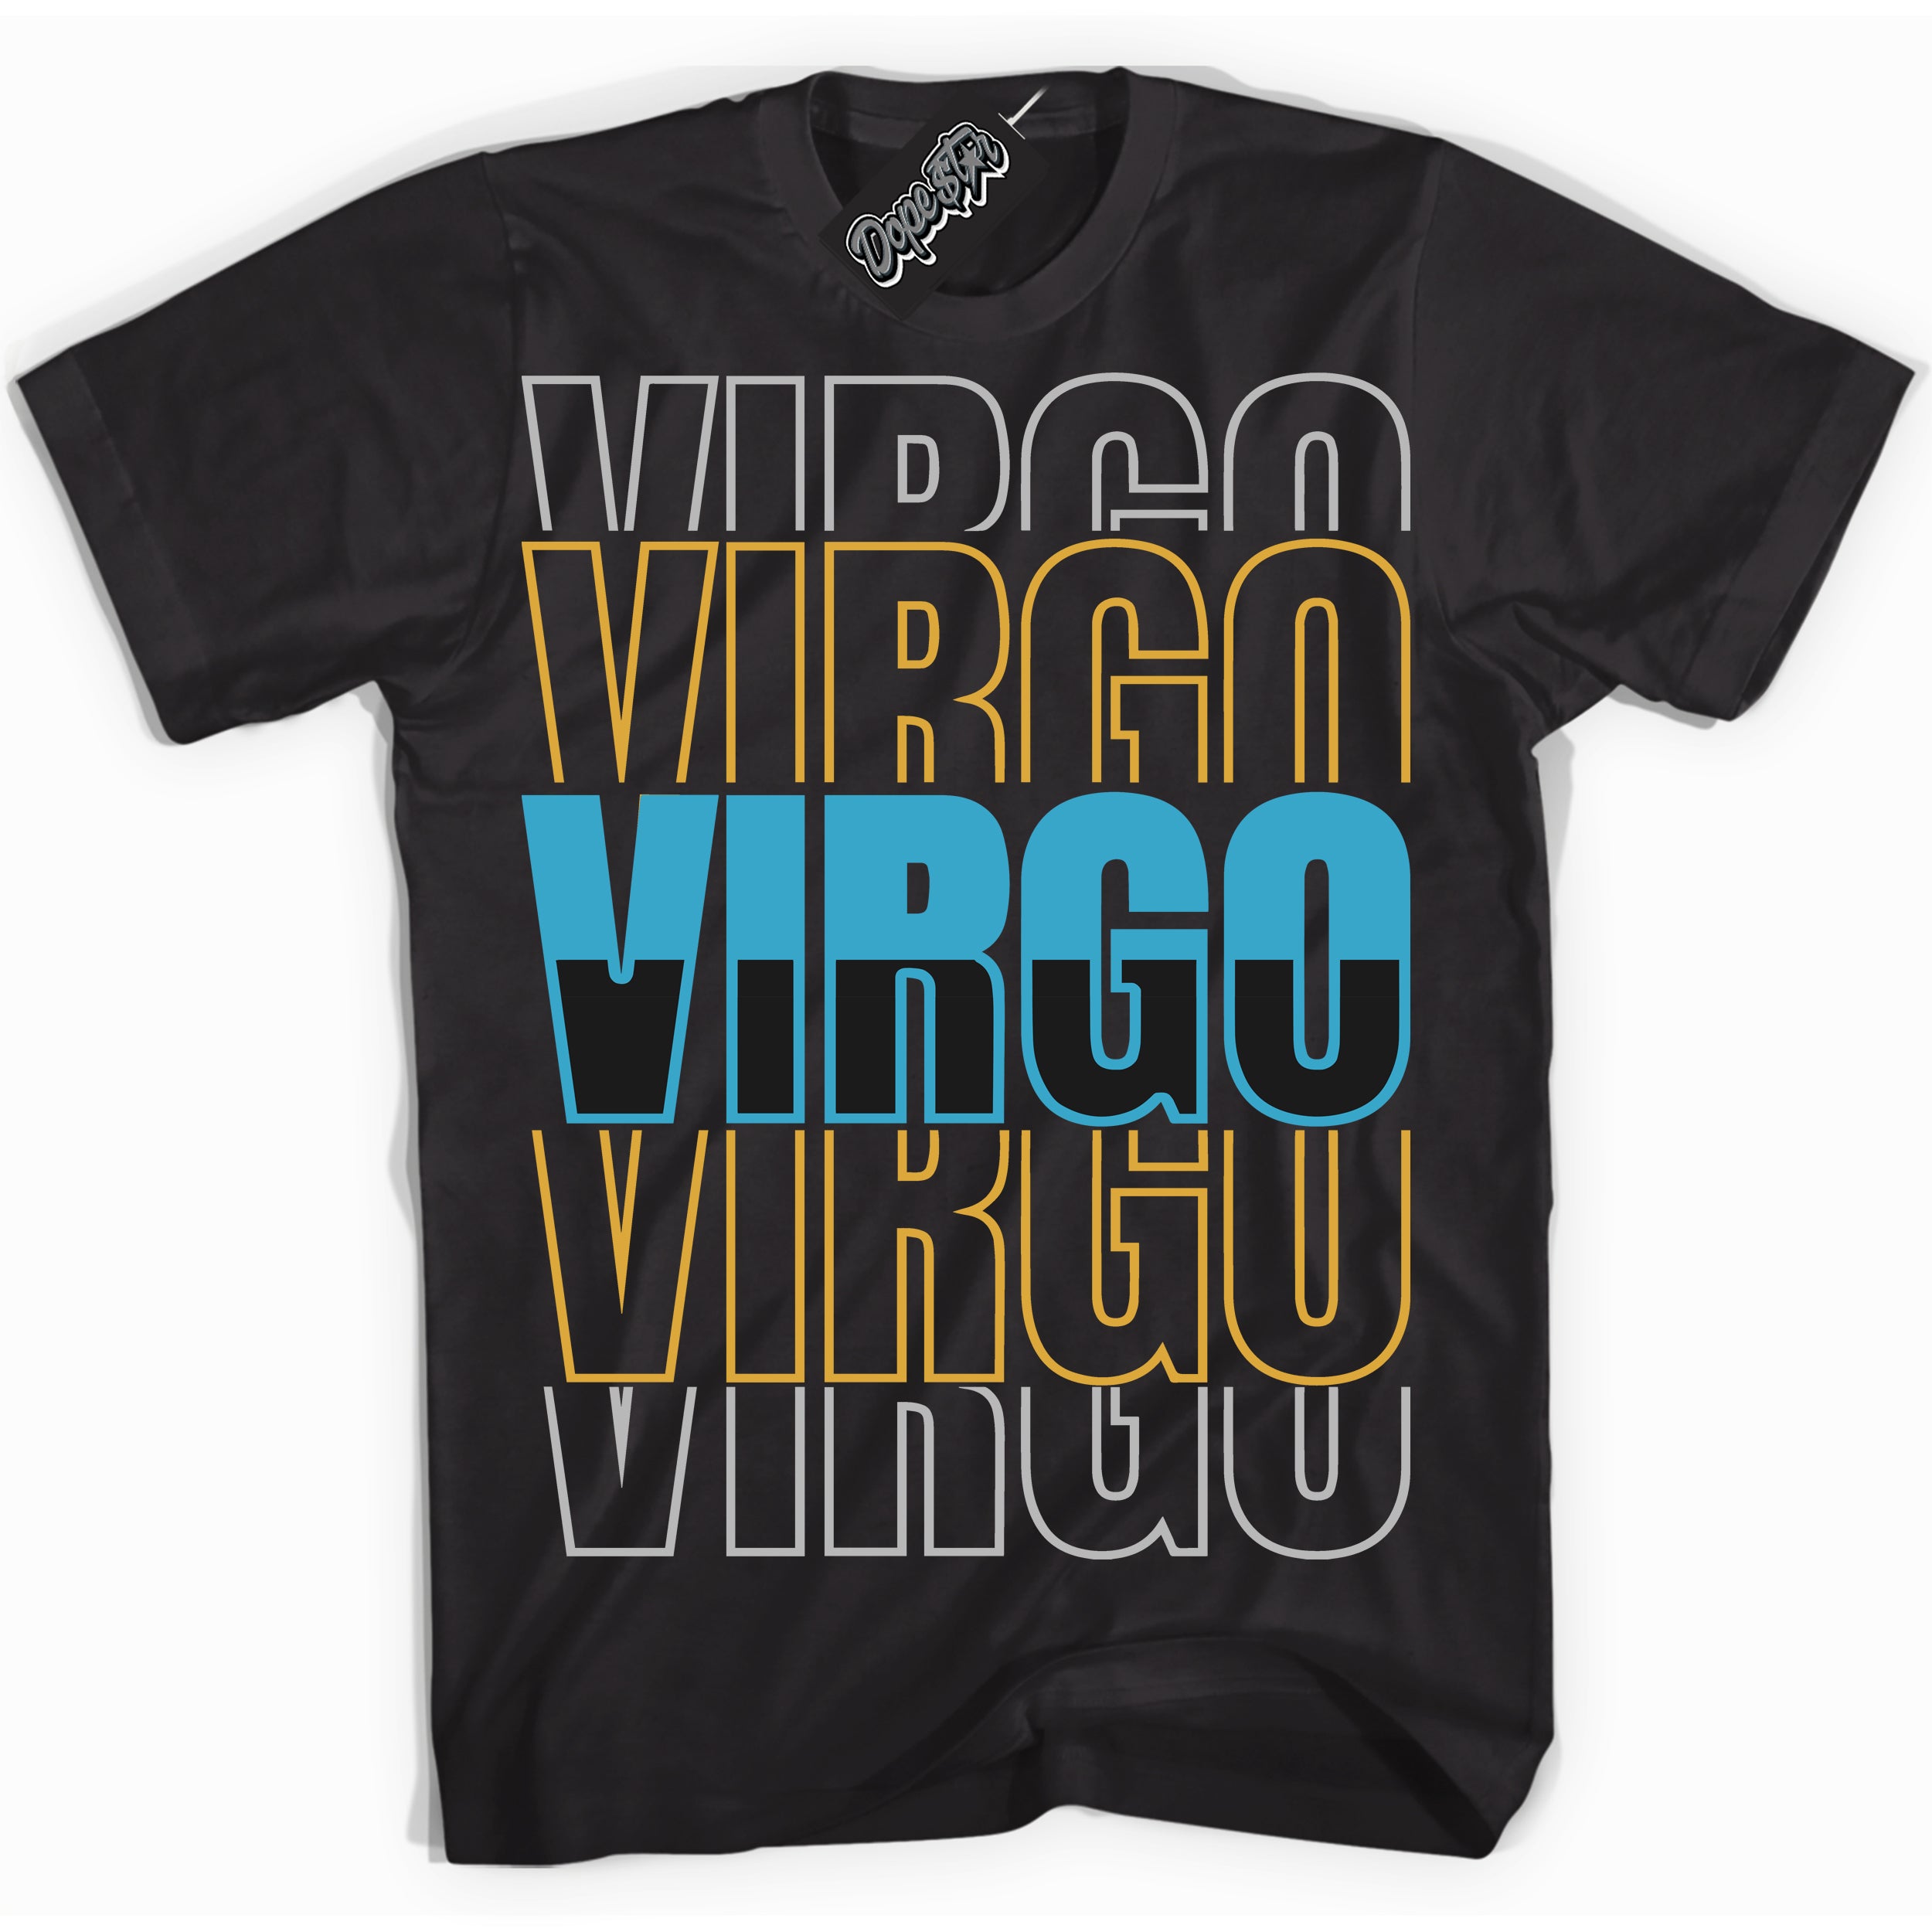 Cool Black Shirt with “ Virgo” design that perfectly matches Aqua 5s Sneakers.